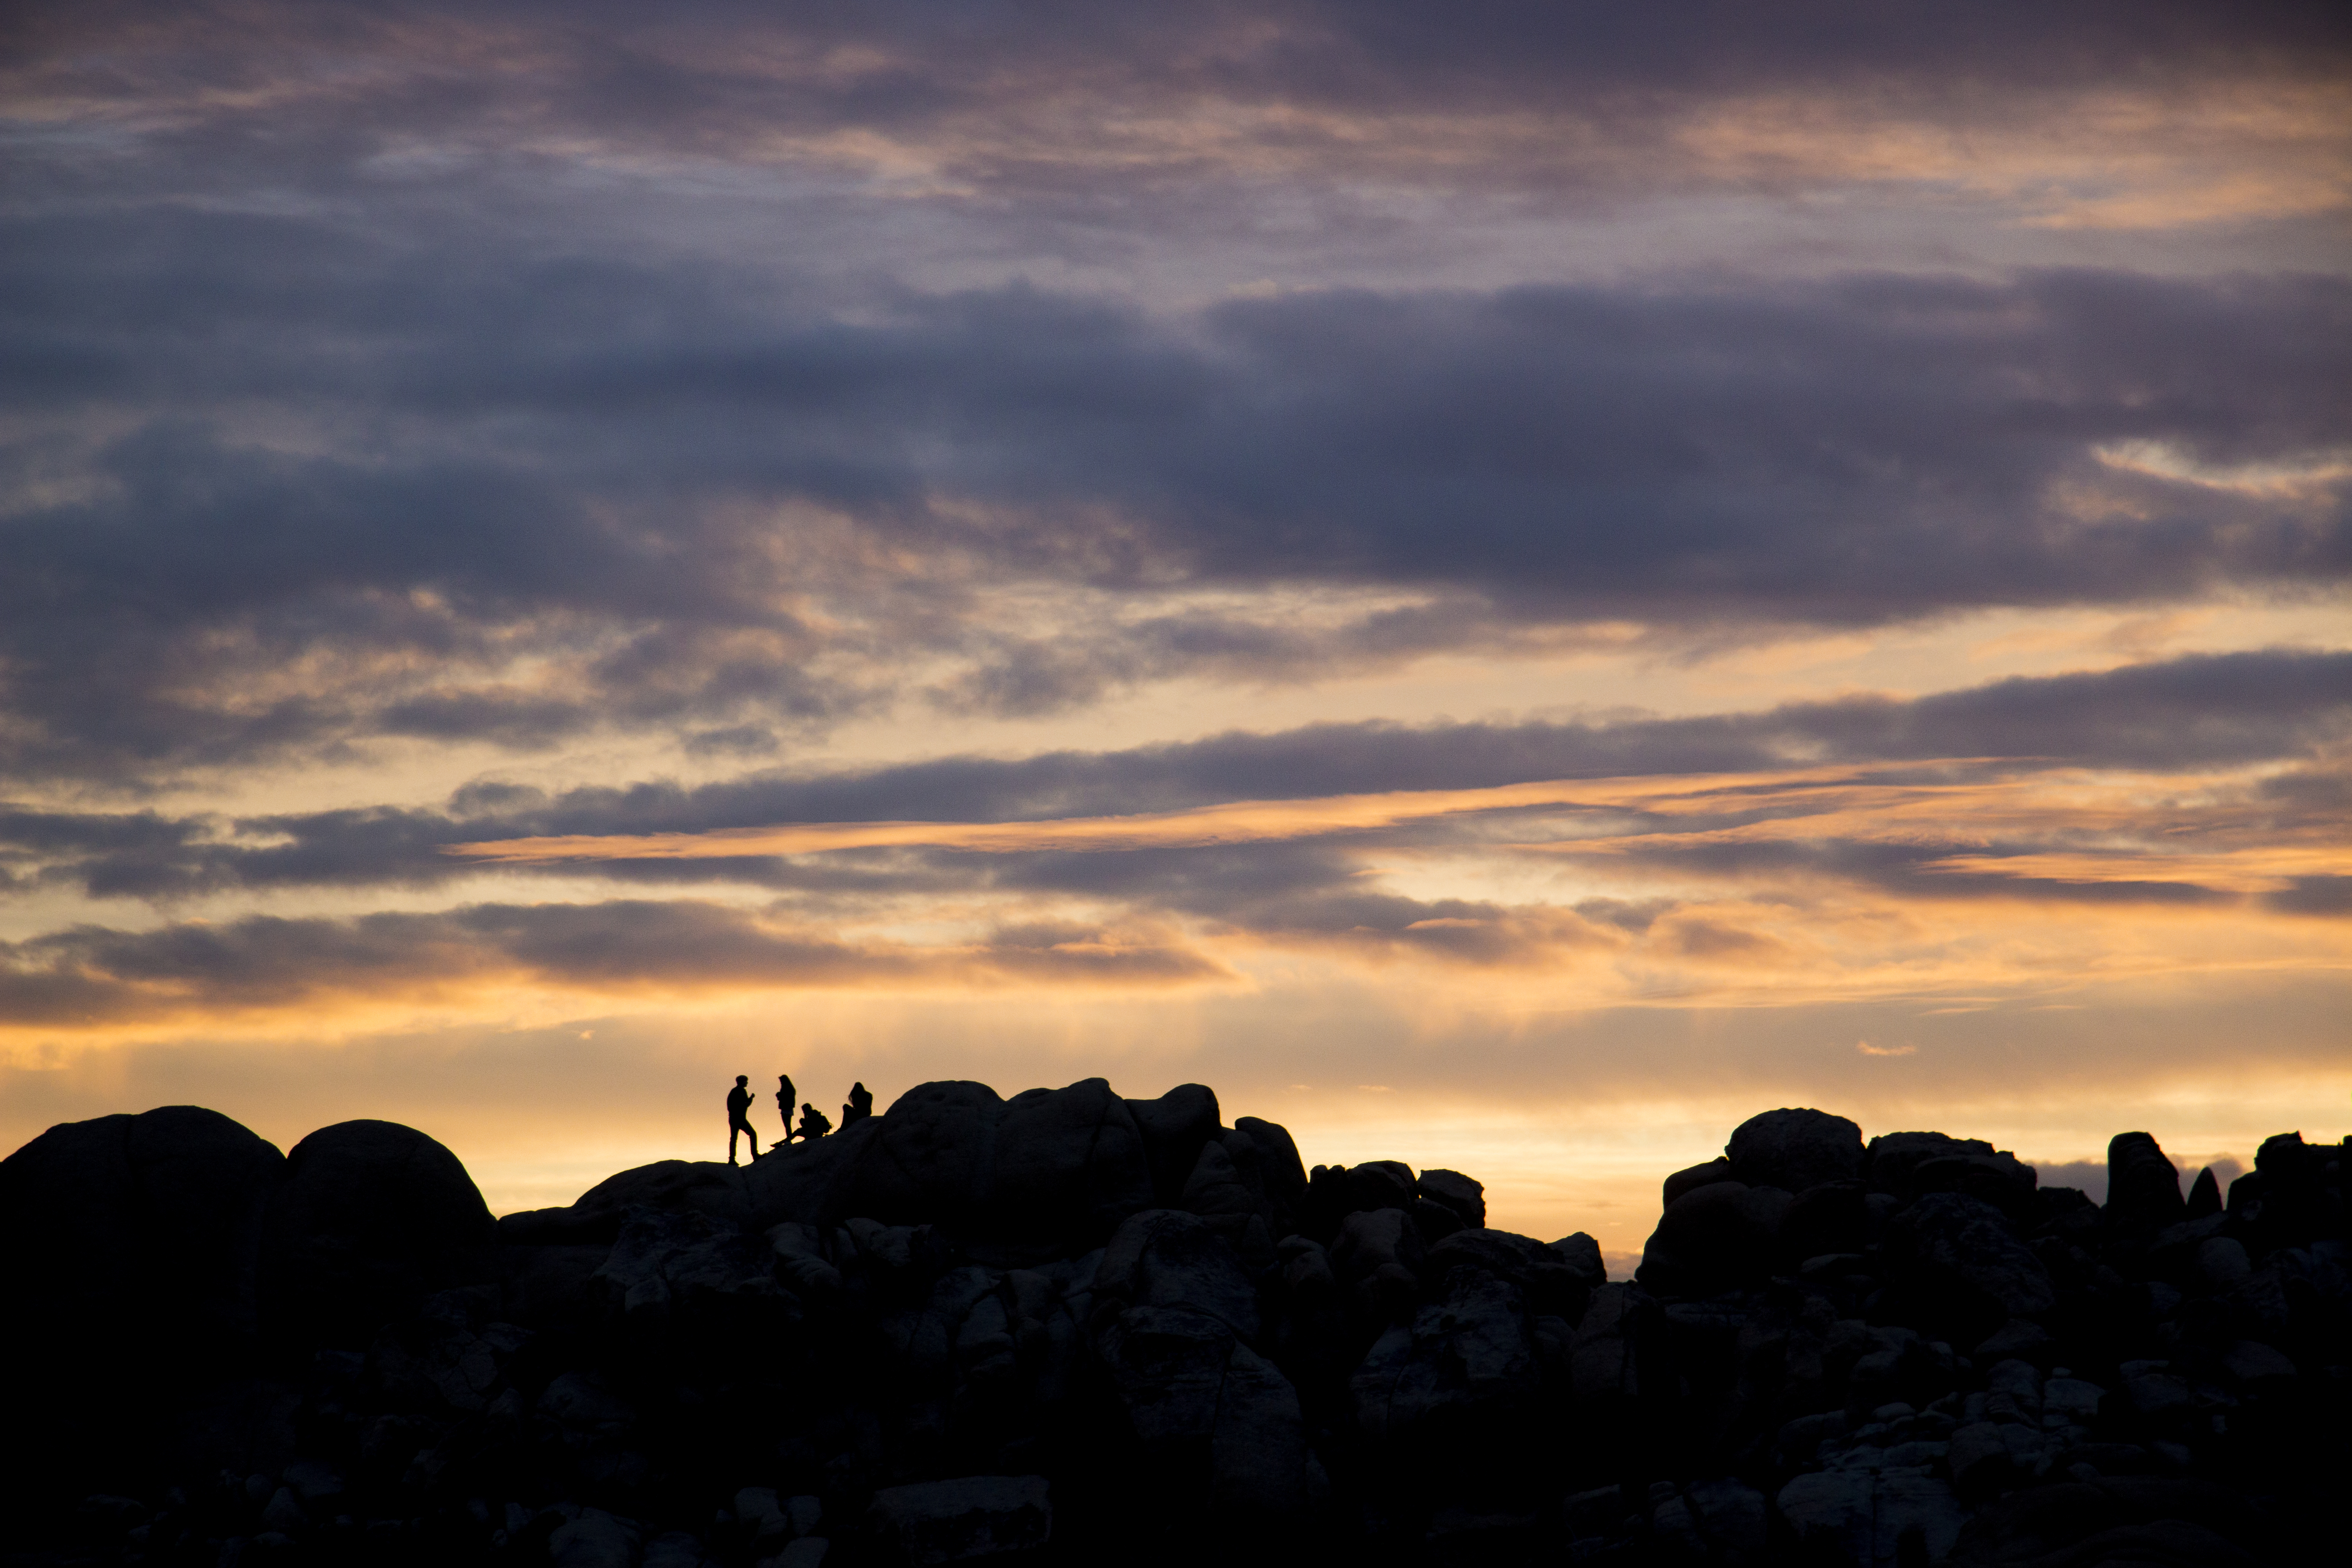 people climbing on boulders are silhouetted against a colorful sunset sky